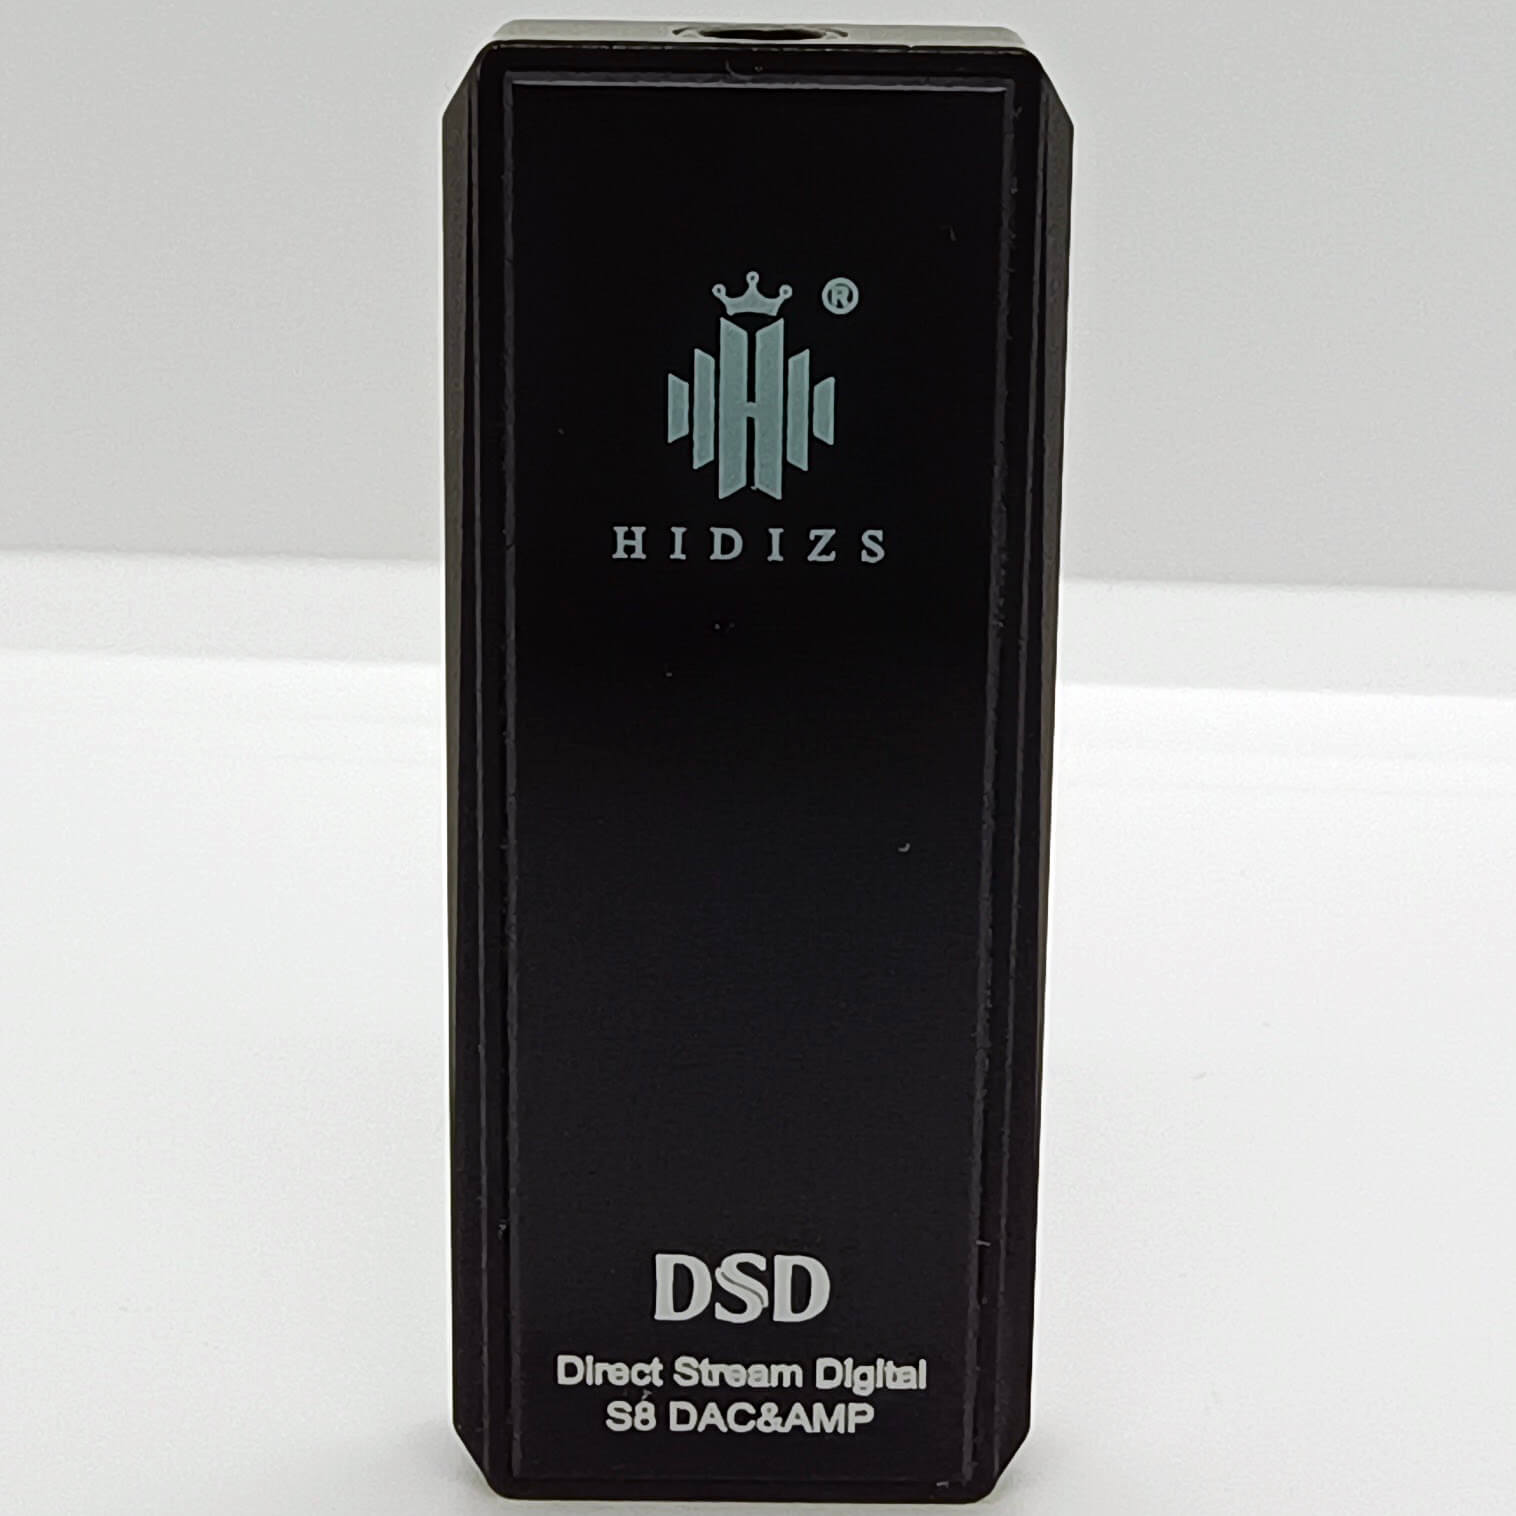 Buy Hidizs S8 Headphone Amplifiers at HiFiNage in India with warranty.